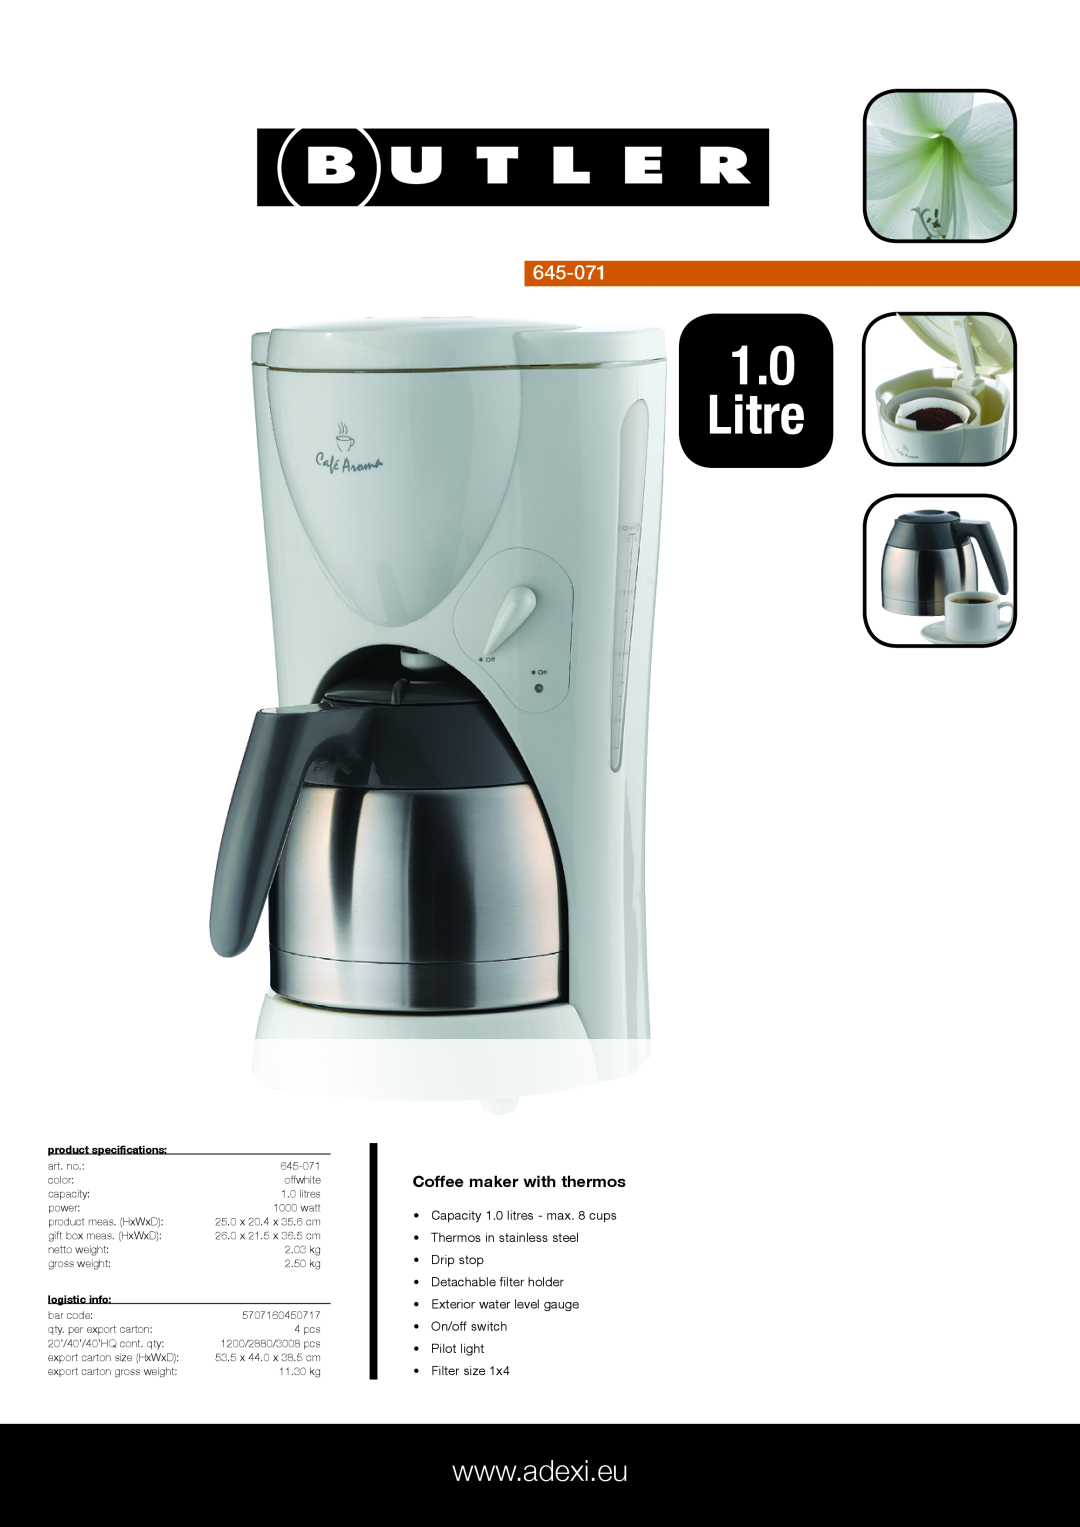 Melissa 645-071 specifications Litre, Coffee maker with thermos, Capacity 1.0 litres - max. 8 cups, product specifications 